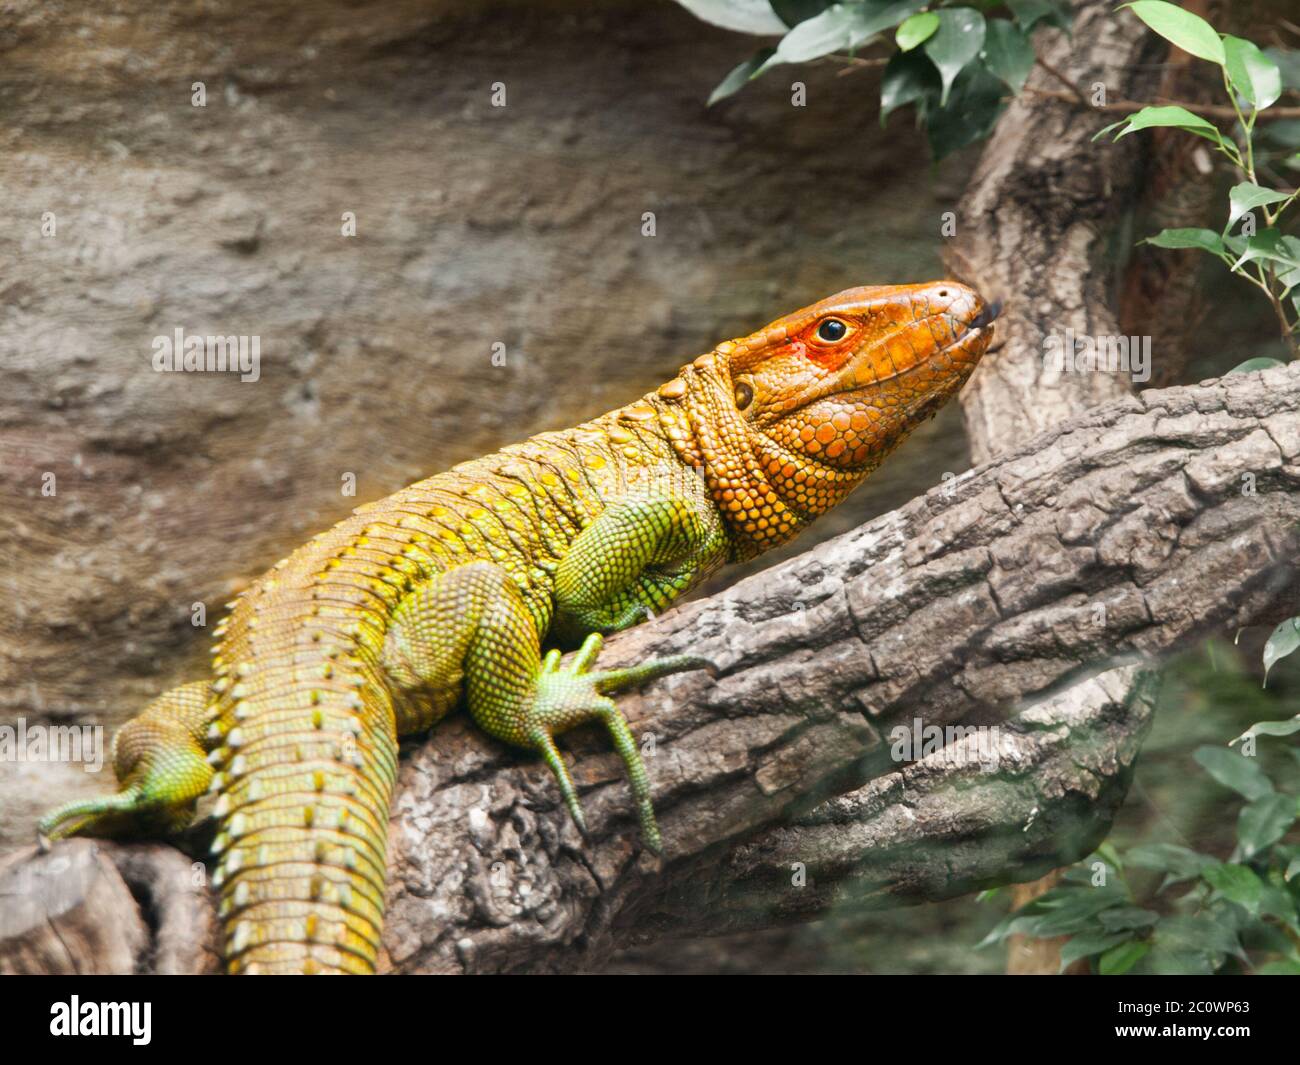 Colorful northern caiman lizard, Dracaena Guianensis, lizard sitting on the tree. Natively found in the jungle of South America. Stock Photo